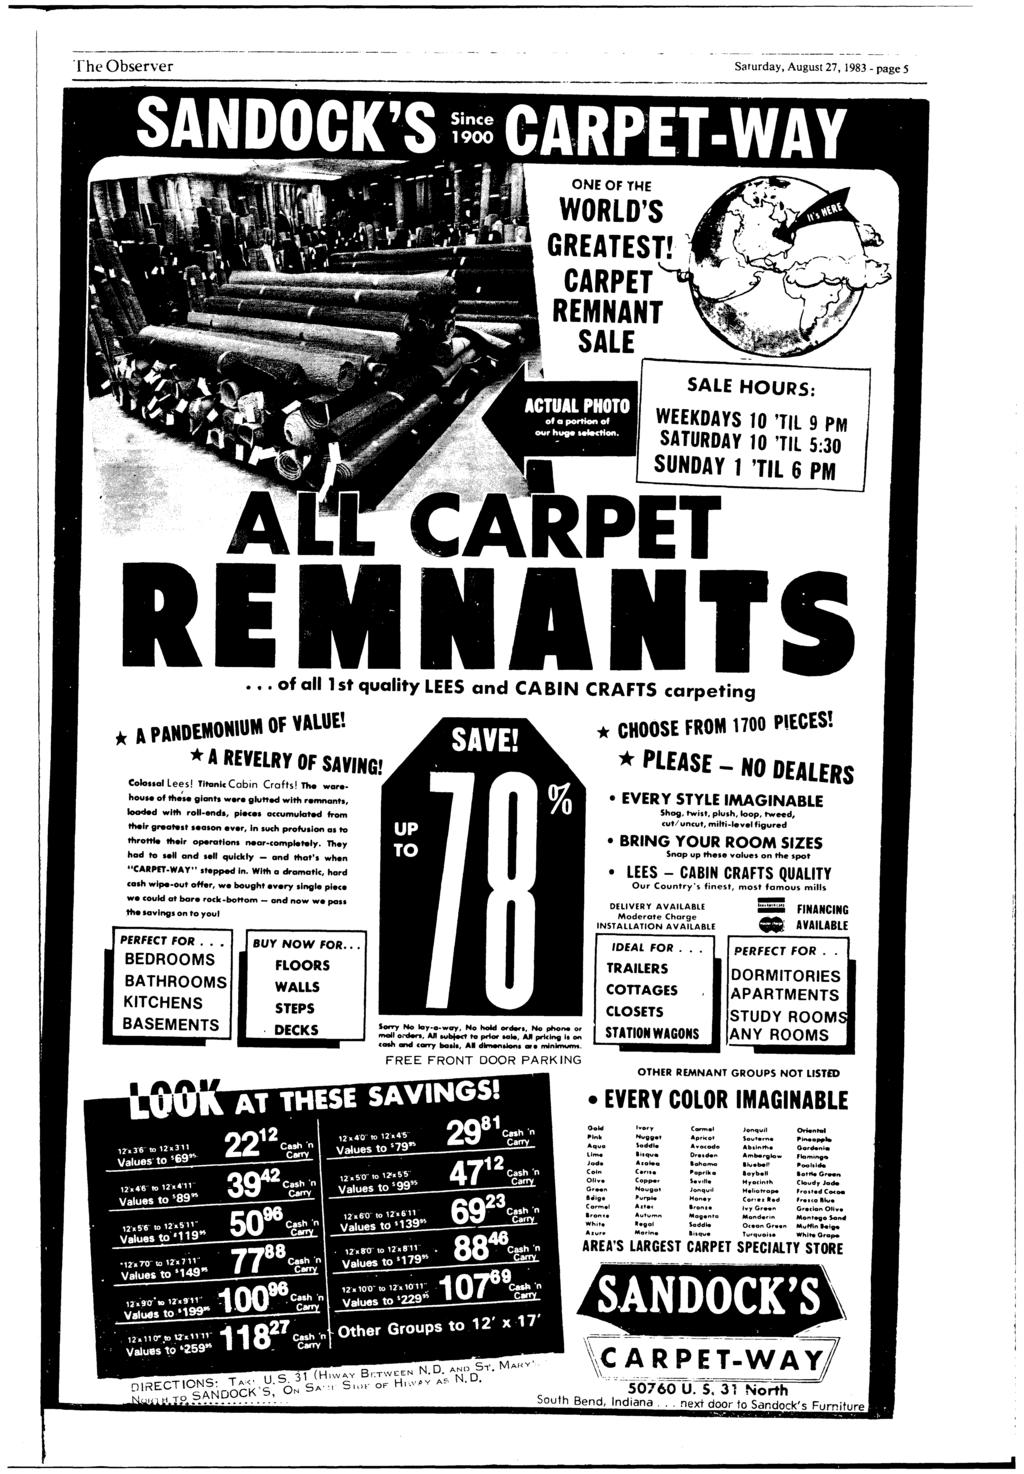 'fhe Observer Saurday, Augus 27, 1983- page 5 -------- -- -- ------------- ONE OF THE WORLD'S GREATEST! ~ CARPET REMNANT SALE SALE HOURS: WEEKDAYS 10 'TL 9 PM SATURDAY 10 'TL 5:30 SUNDAY 1 'TL 6 PM.